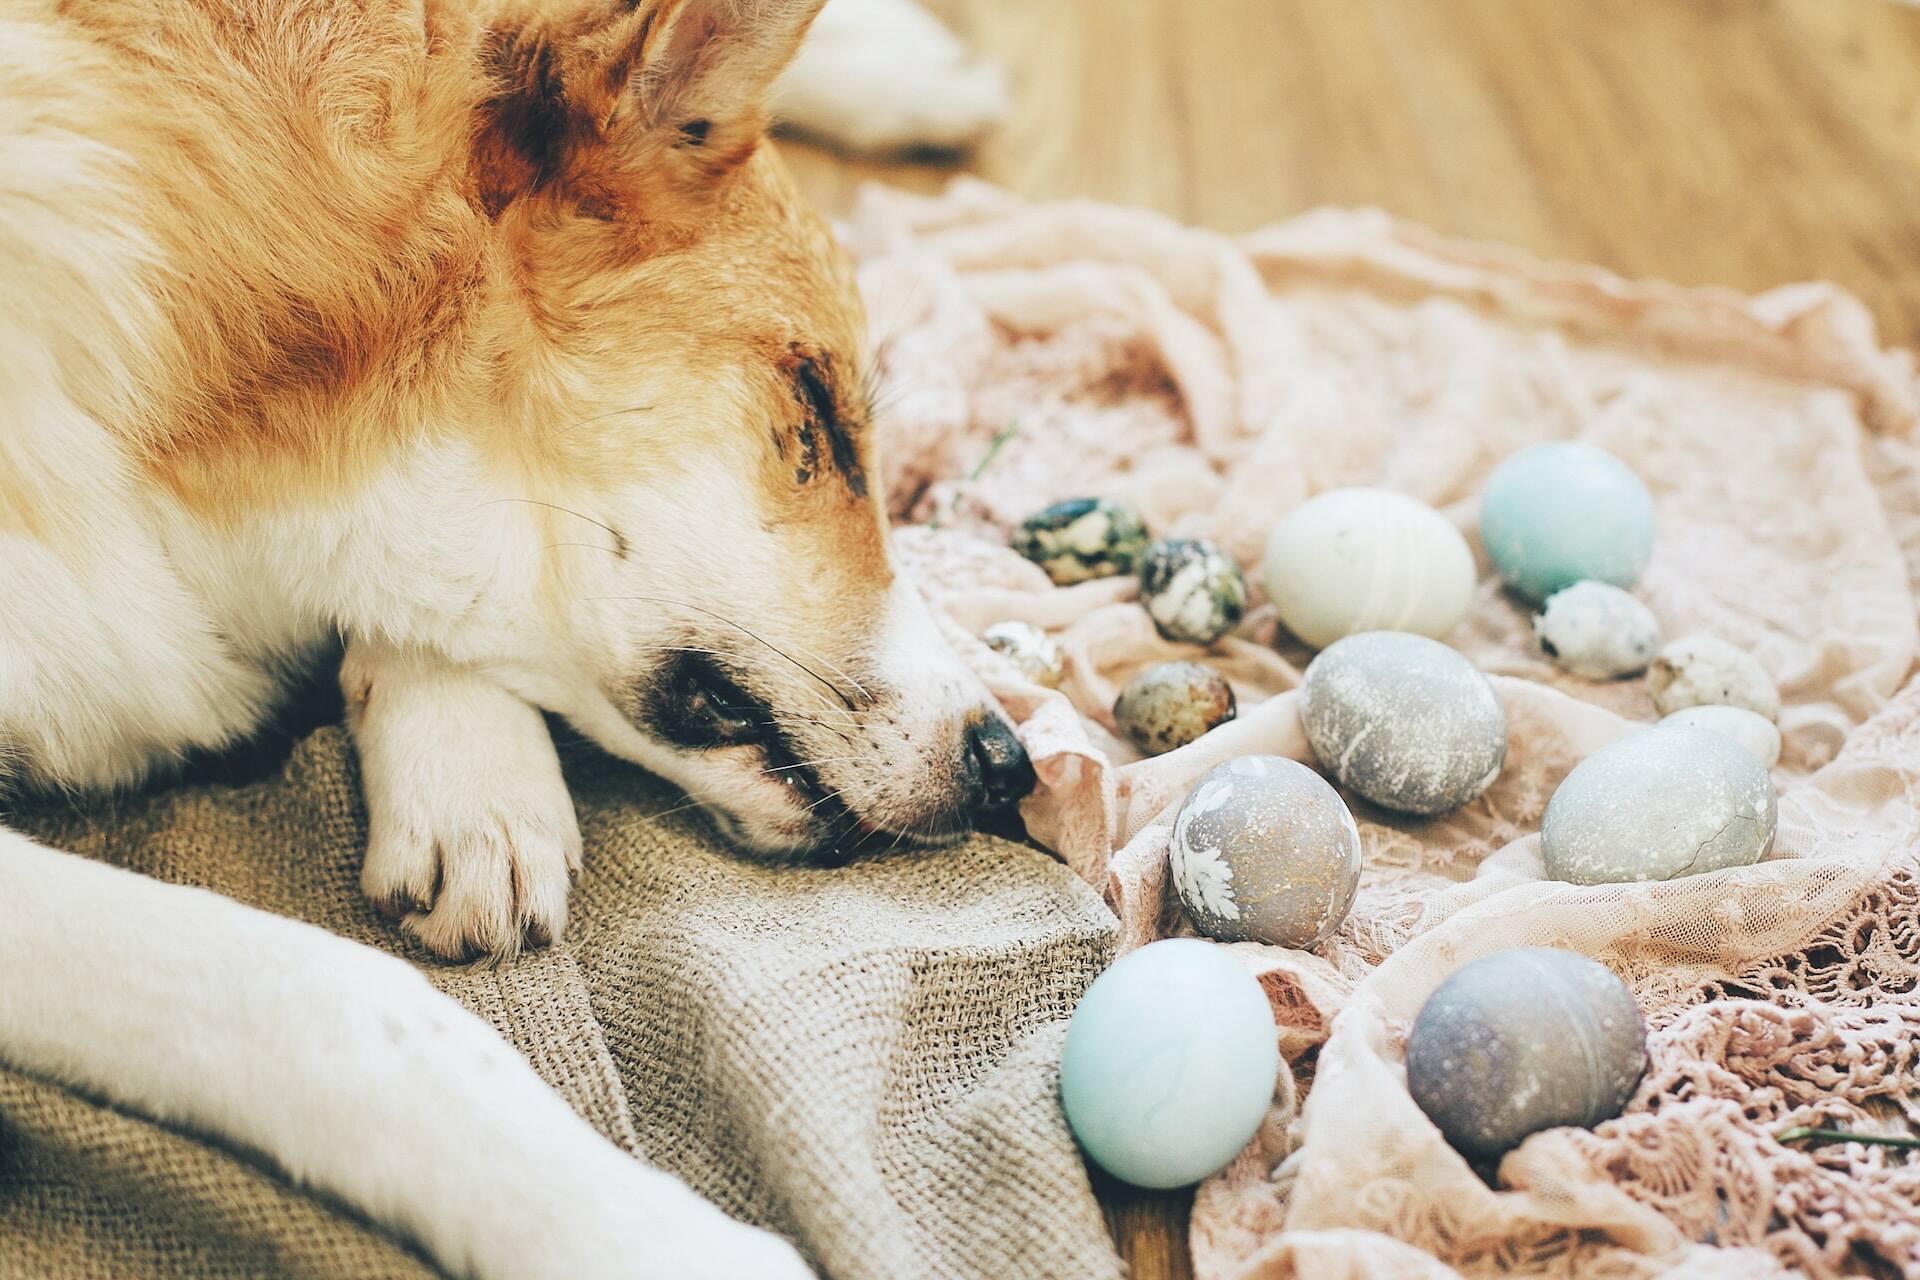 A dog sleeping on a blanket next to some Easter eggs